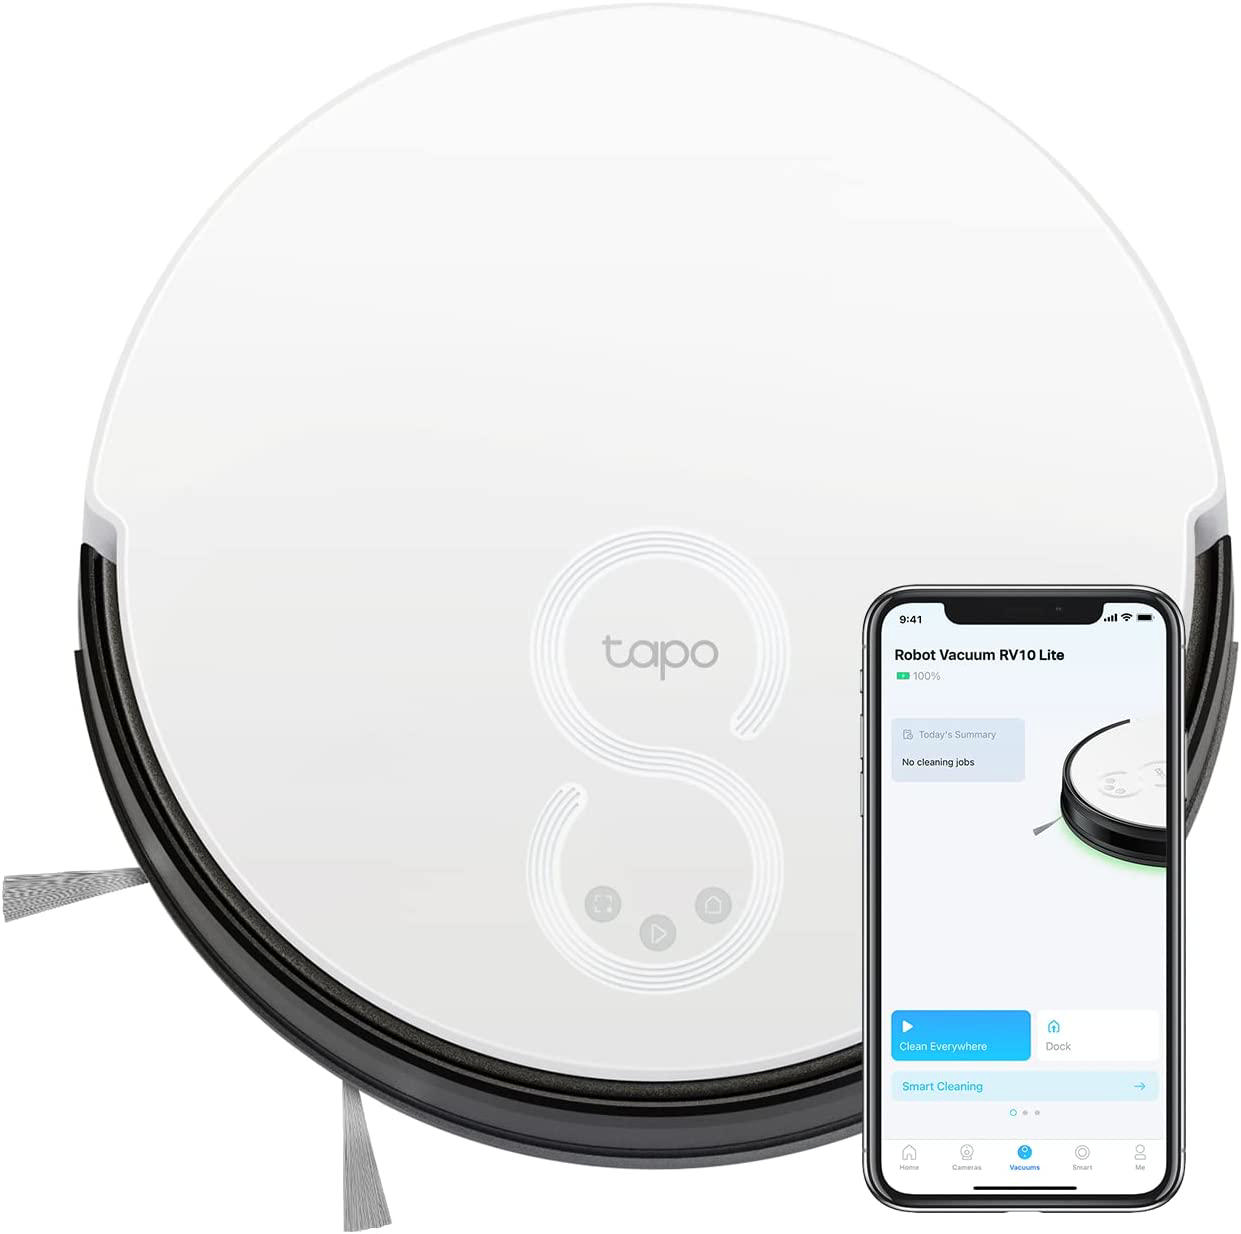 TP-LINK TAPO RV10 ROBOT VACUUM & MOP CLEANER